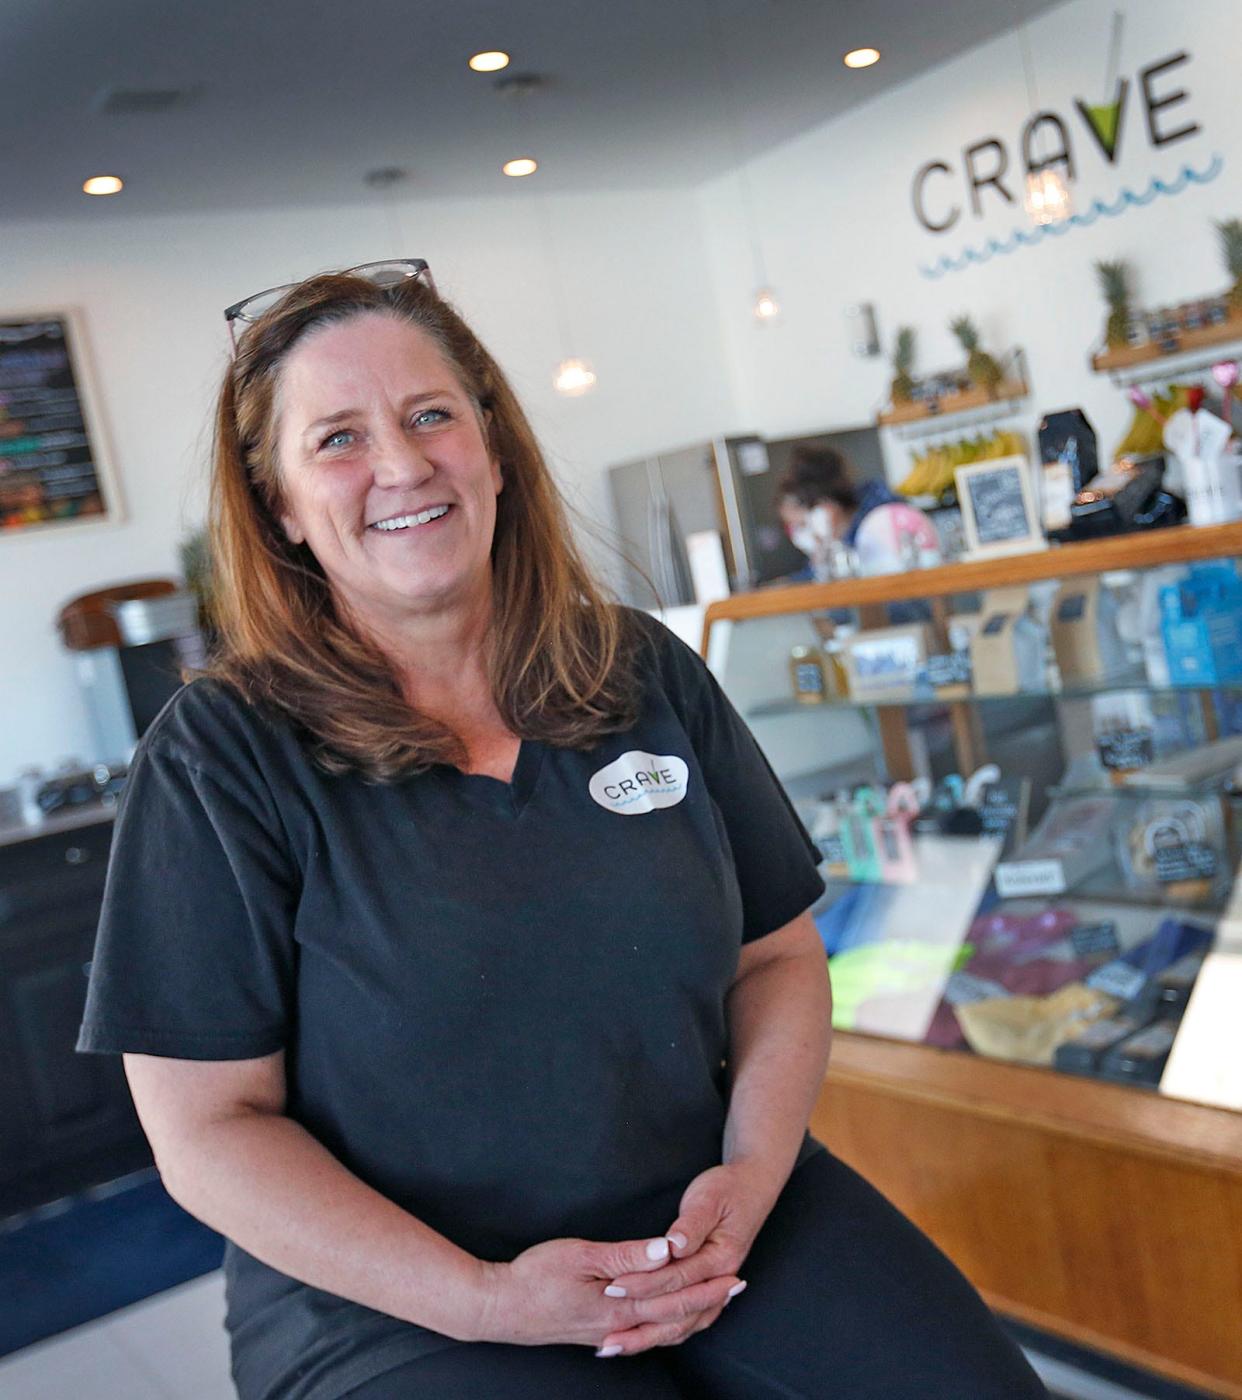 Hull business owner Casey Mahoney in Crave, her Nantasket Avenue shop that serves coffee and smoothies along with other treats, Monday, Jan. 31, 2022.